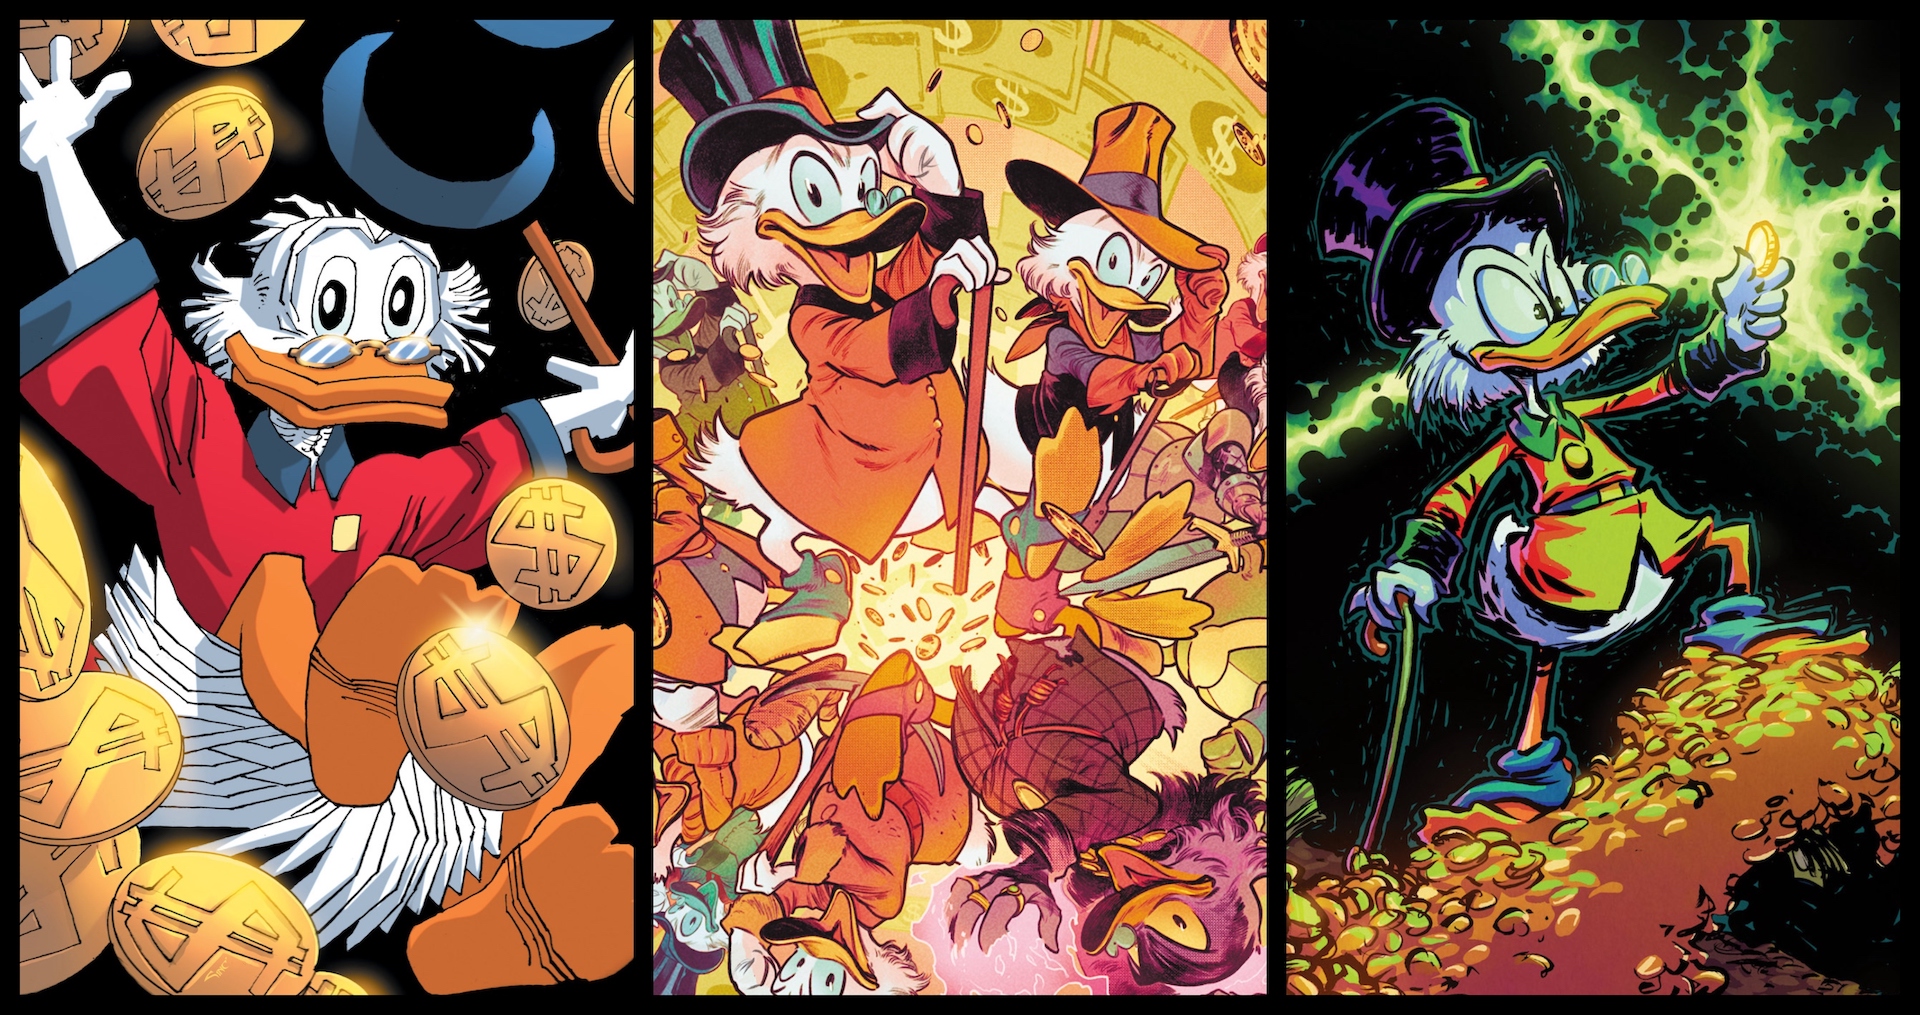 Marvel shows off 'Uncle Scrooge and the Infinity Dime' #1 covers